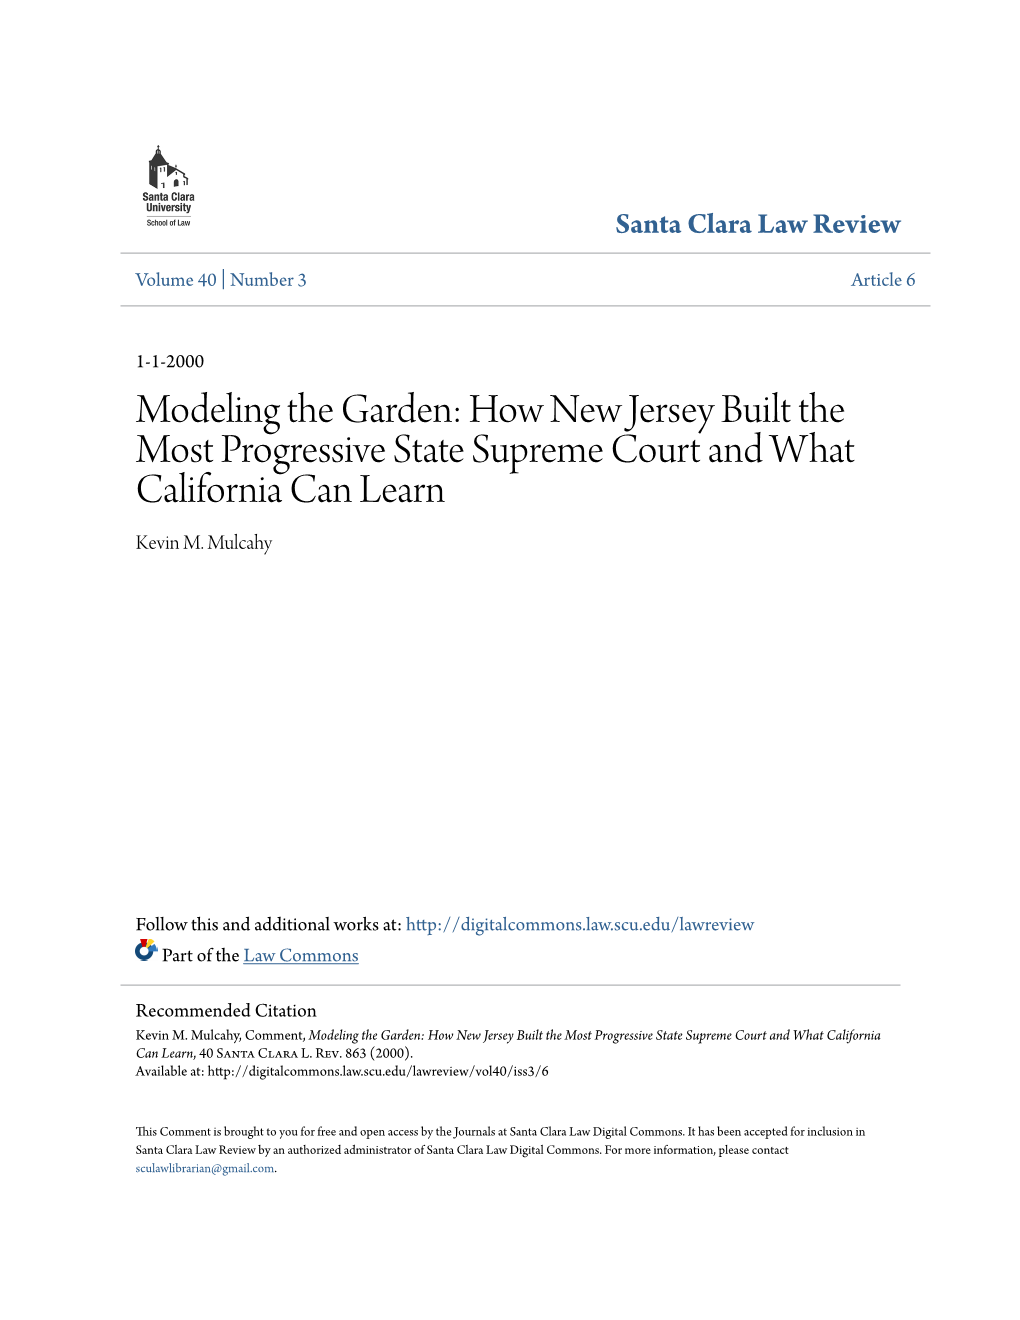 How New Jersey Built the Most Progressive State Supreme Court and What California Can Learn Kevin M